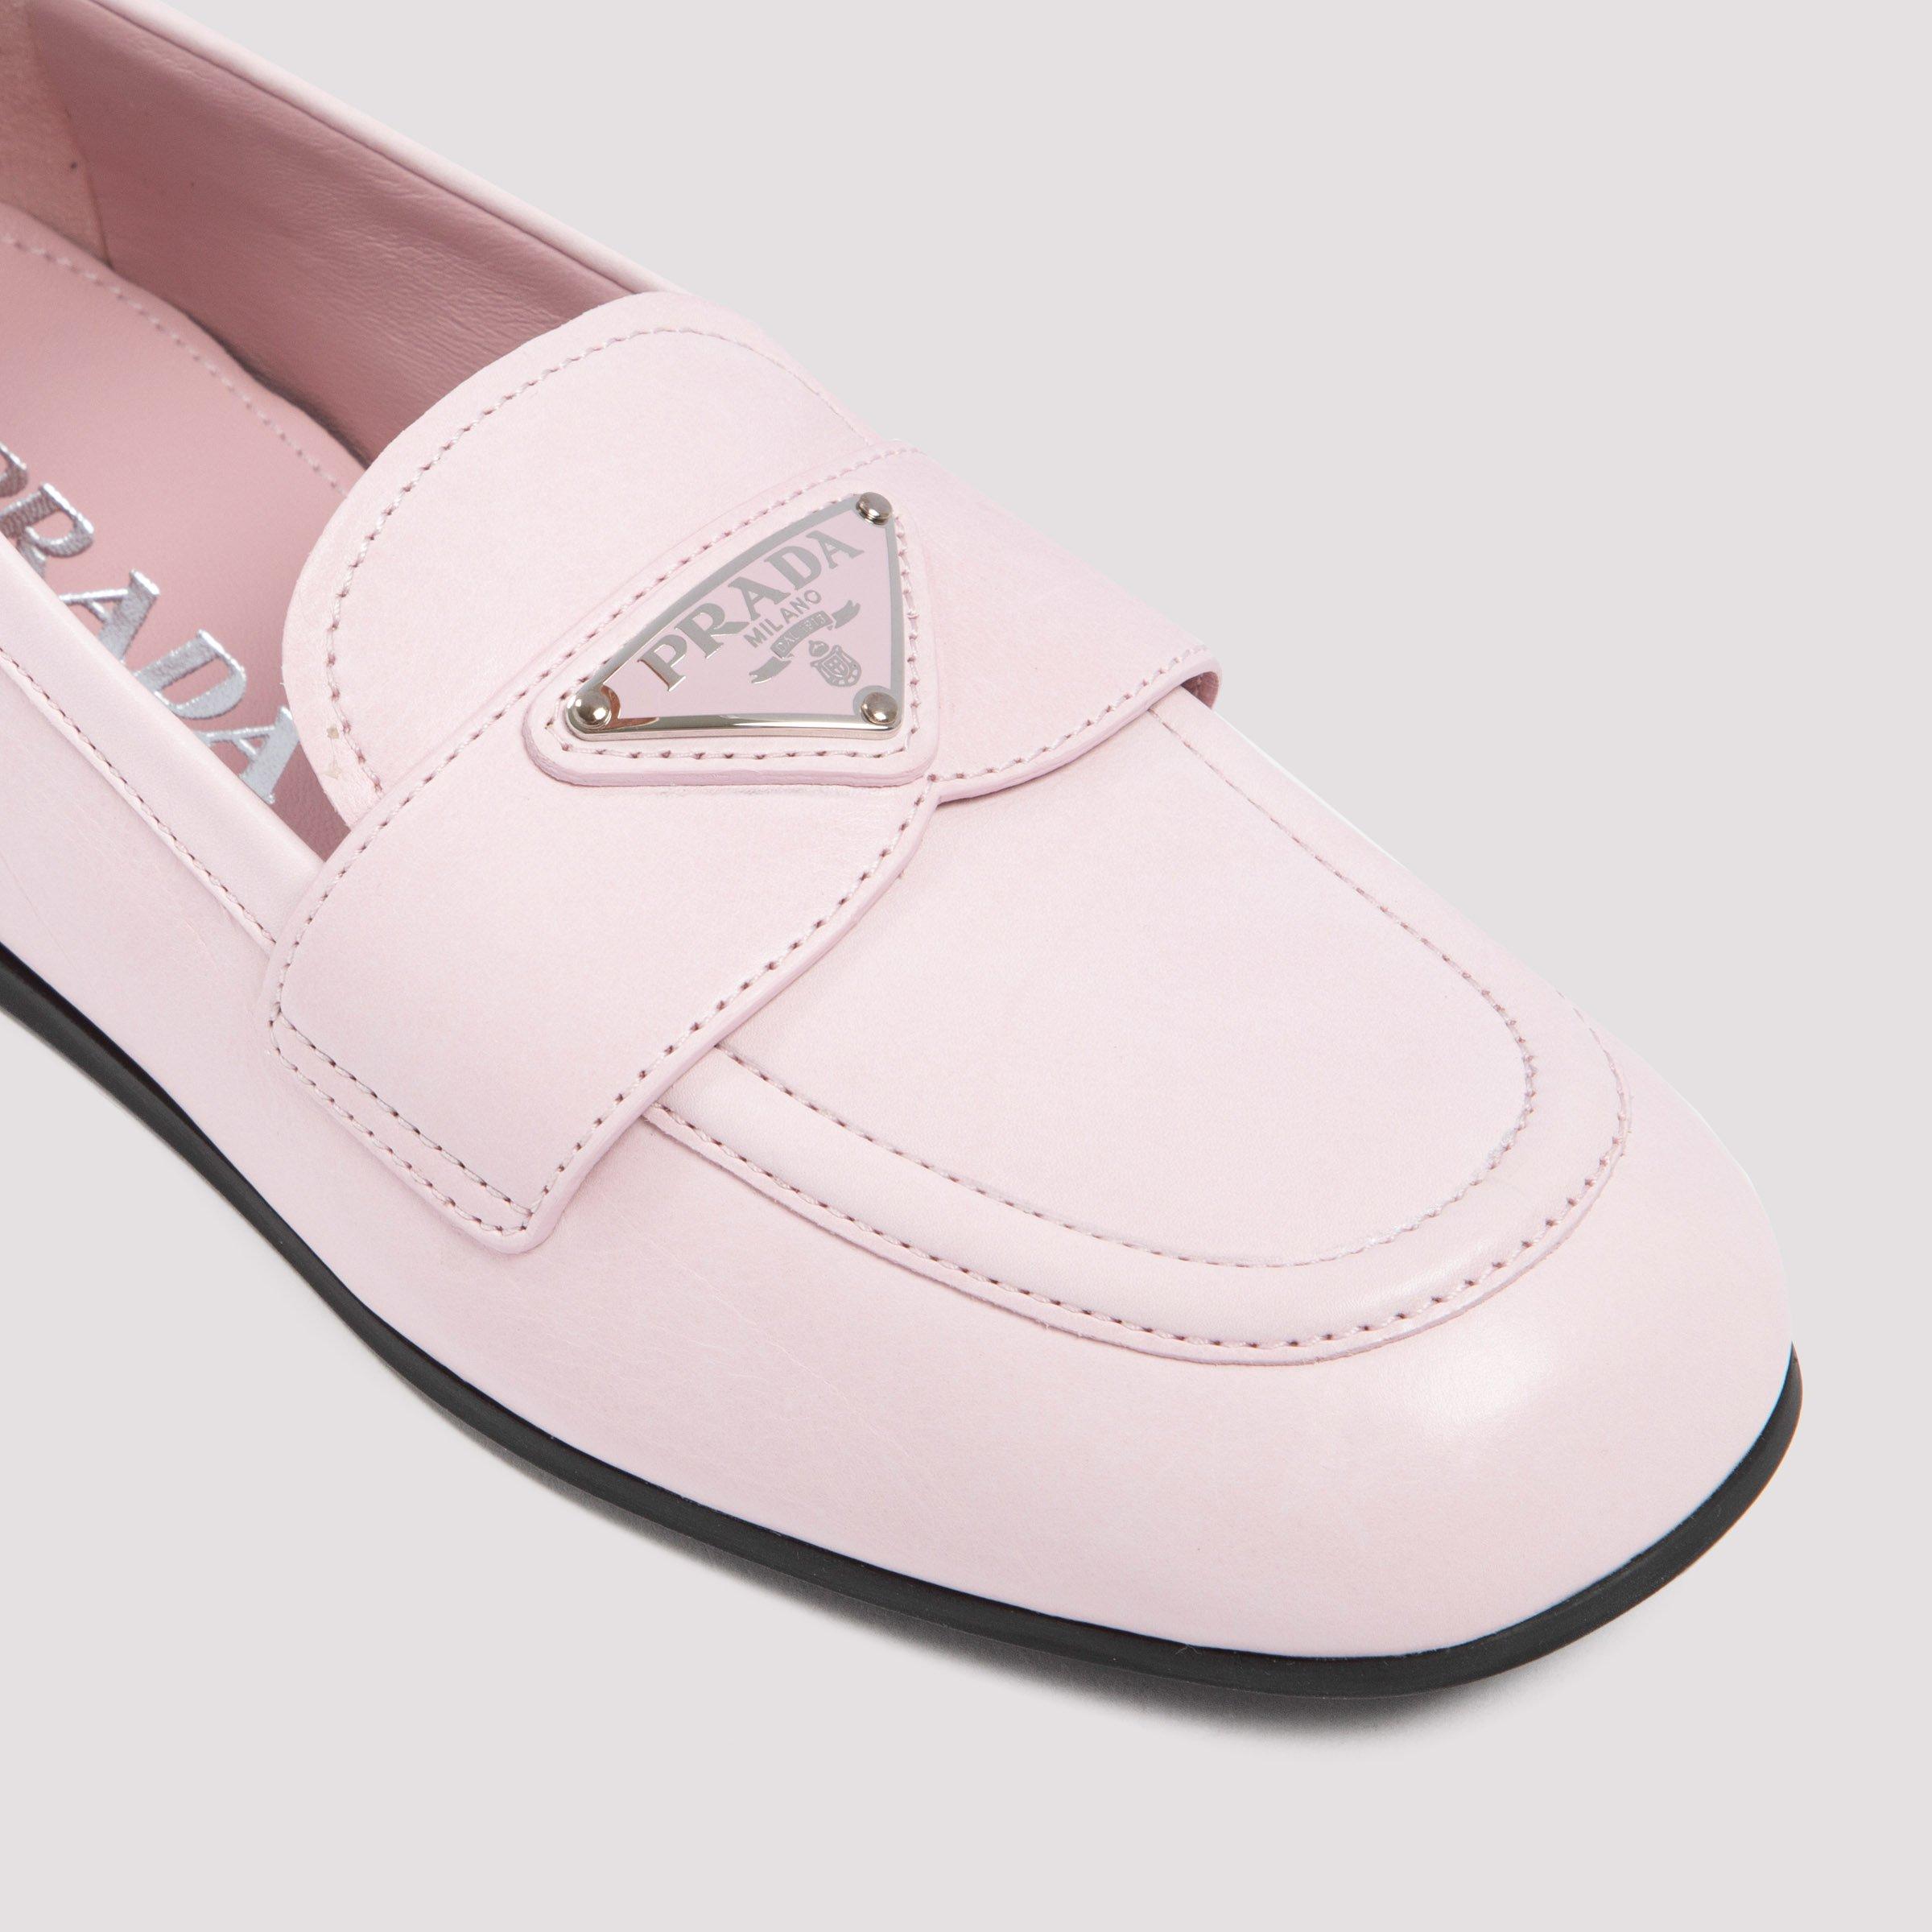 Prada Loafers in Nude (Pink) - Lyst